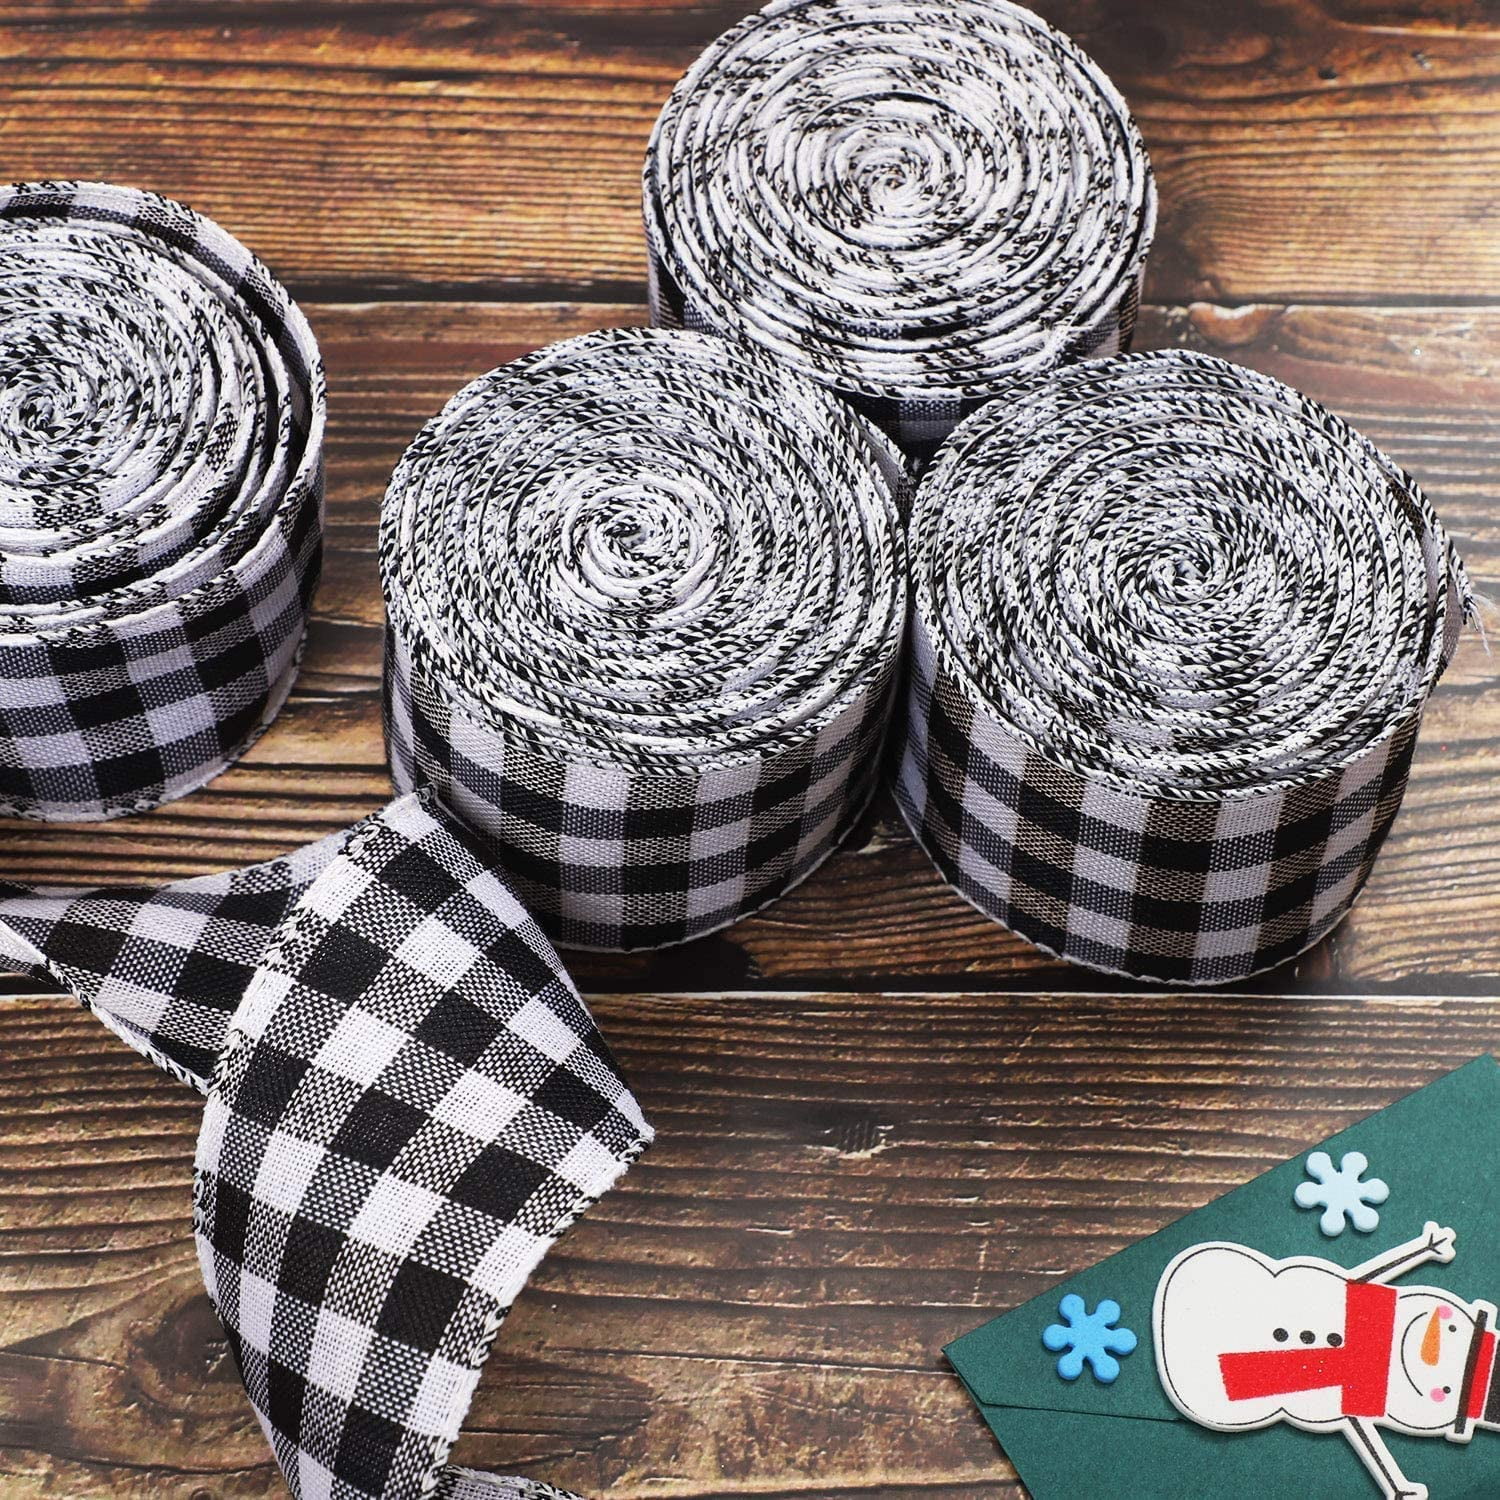 White and Black, 6.3cm x 6m Christmas Wreaths Craft 4 Rolls White and Black Plaid Burlap Christmas Wrapping Ribbon Gingham Christmas Tree Bows Wired Plaid Ribbon for Crafts Decoration